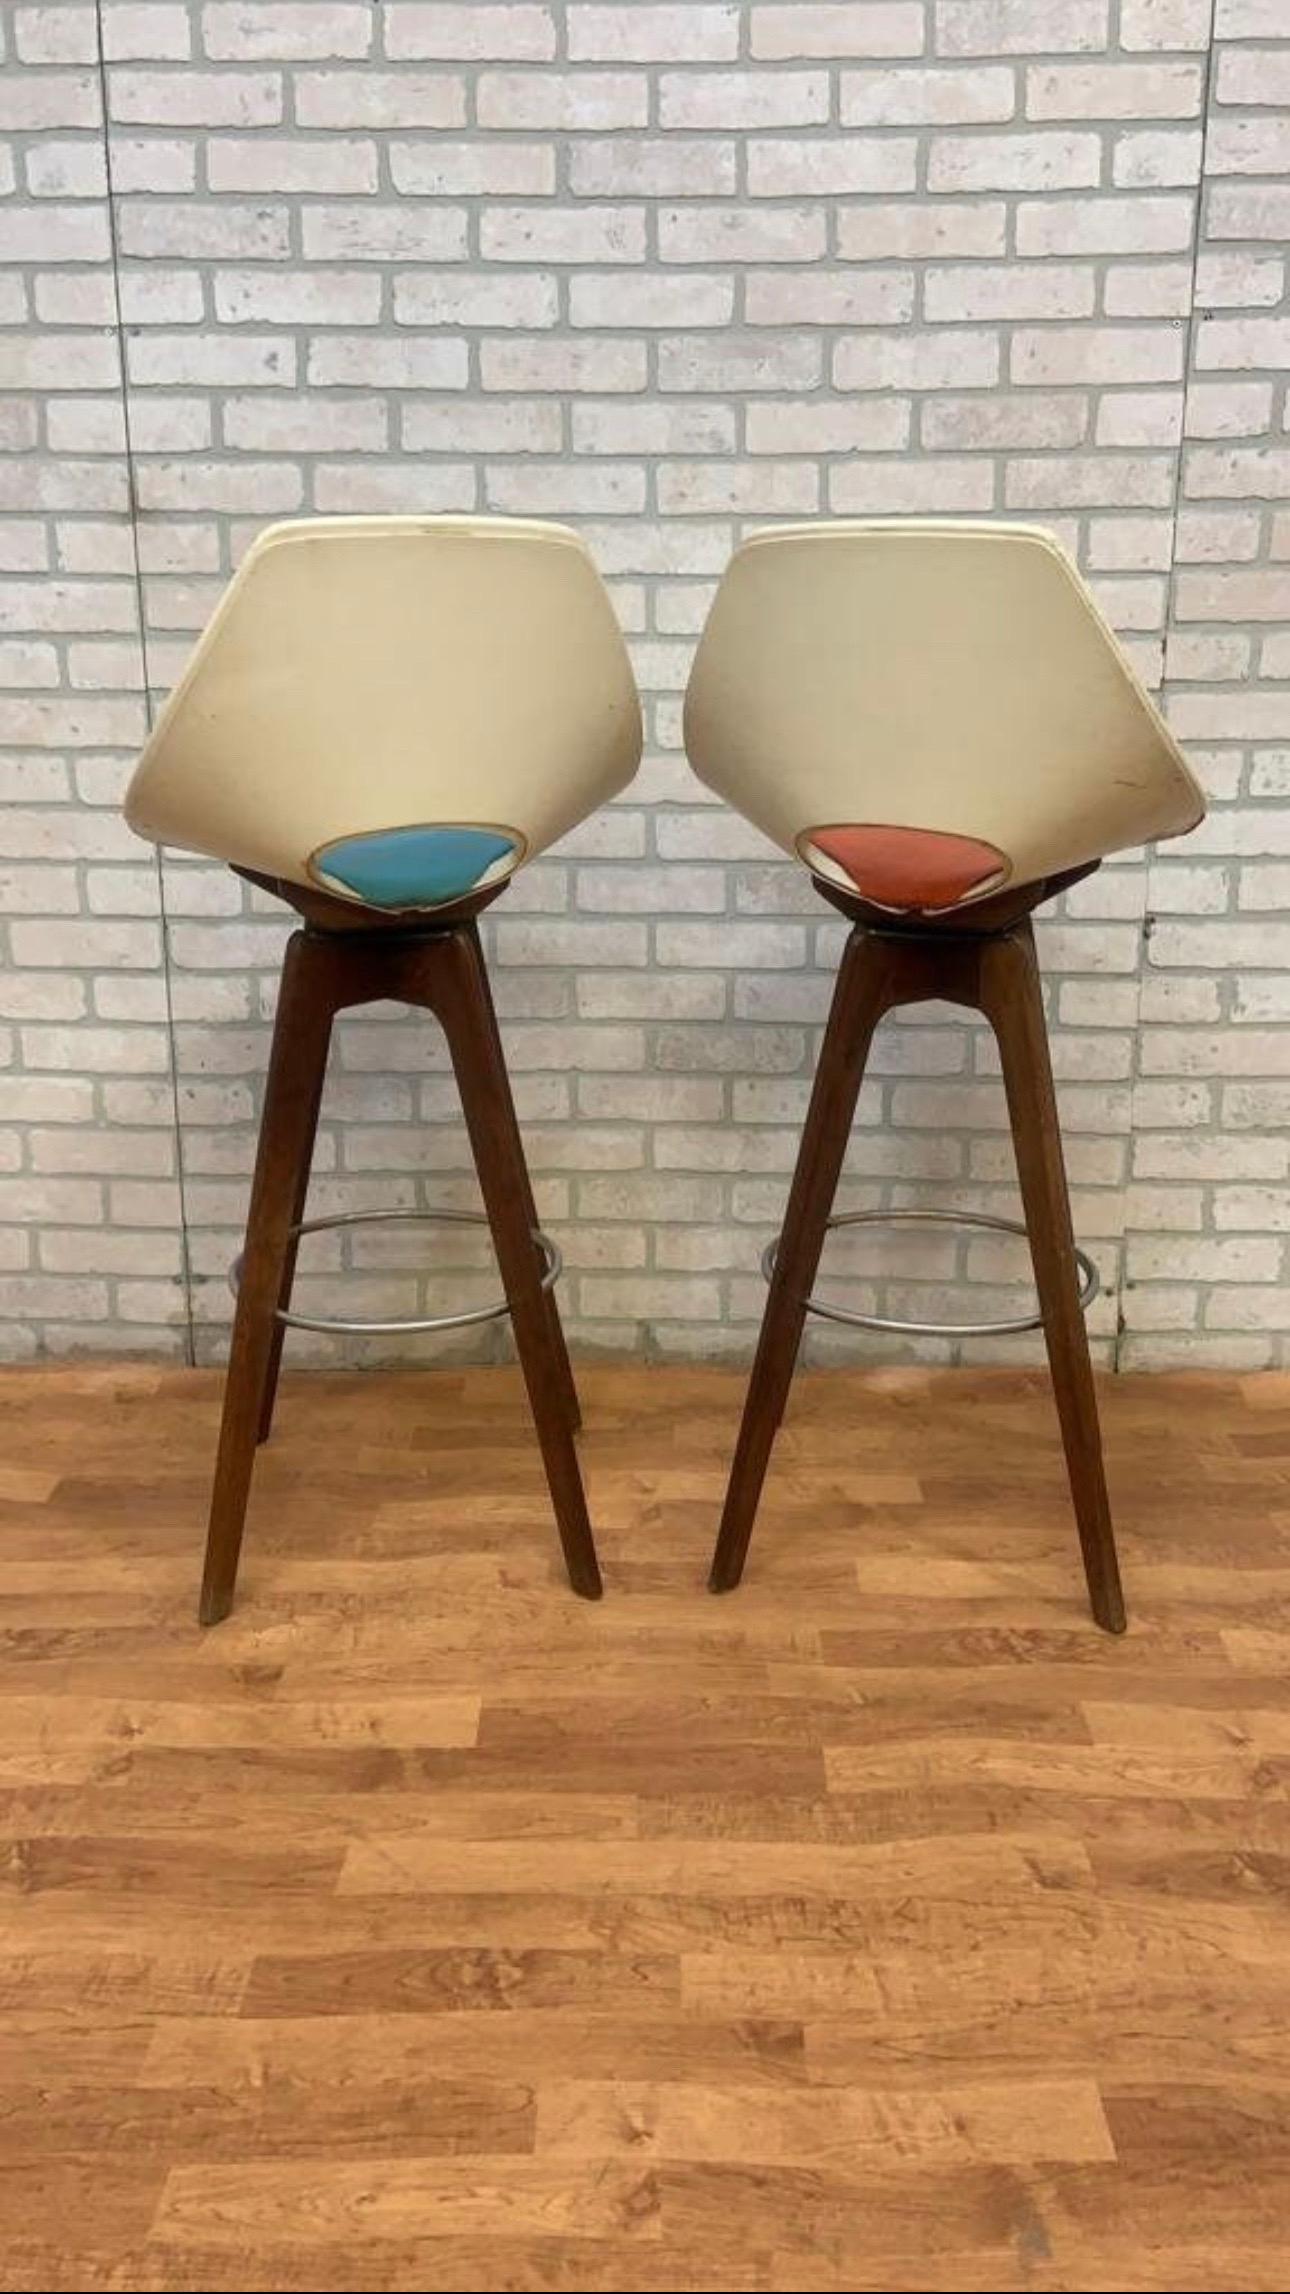 Hand-Crafted Mid-Century Modern Stools Designed by John Yellen - Pair For Sale